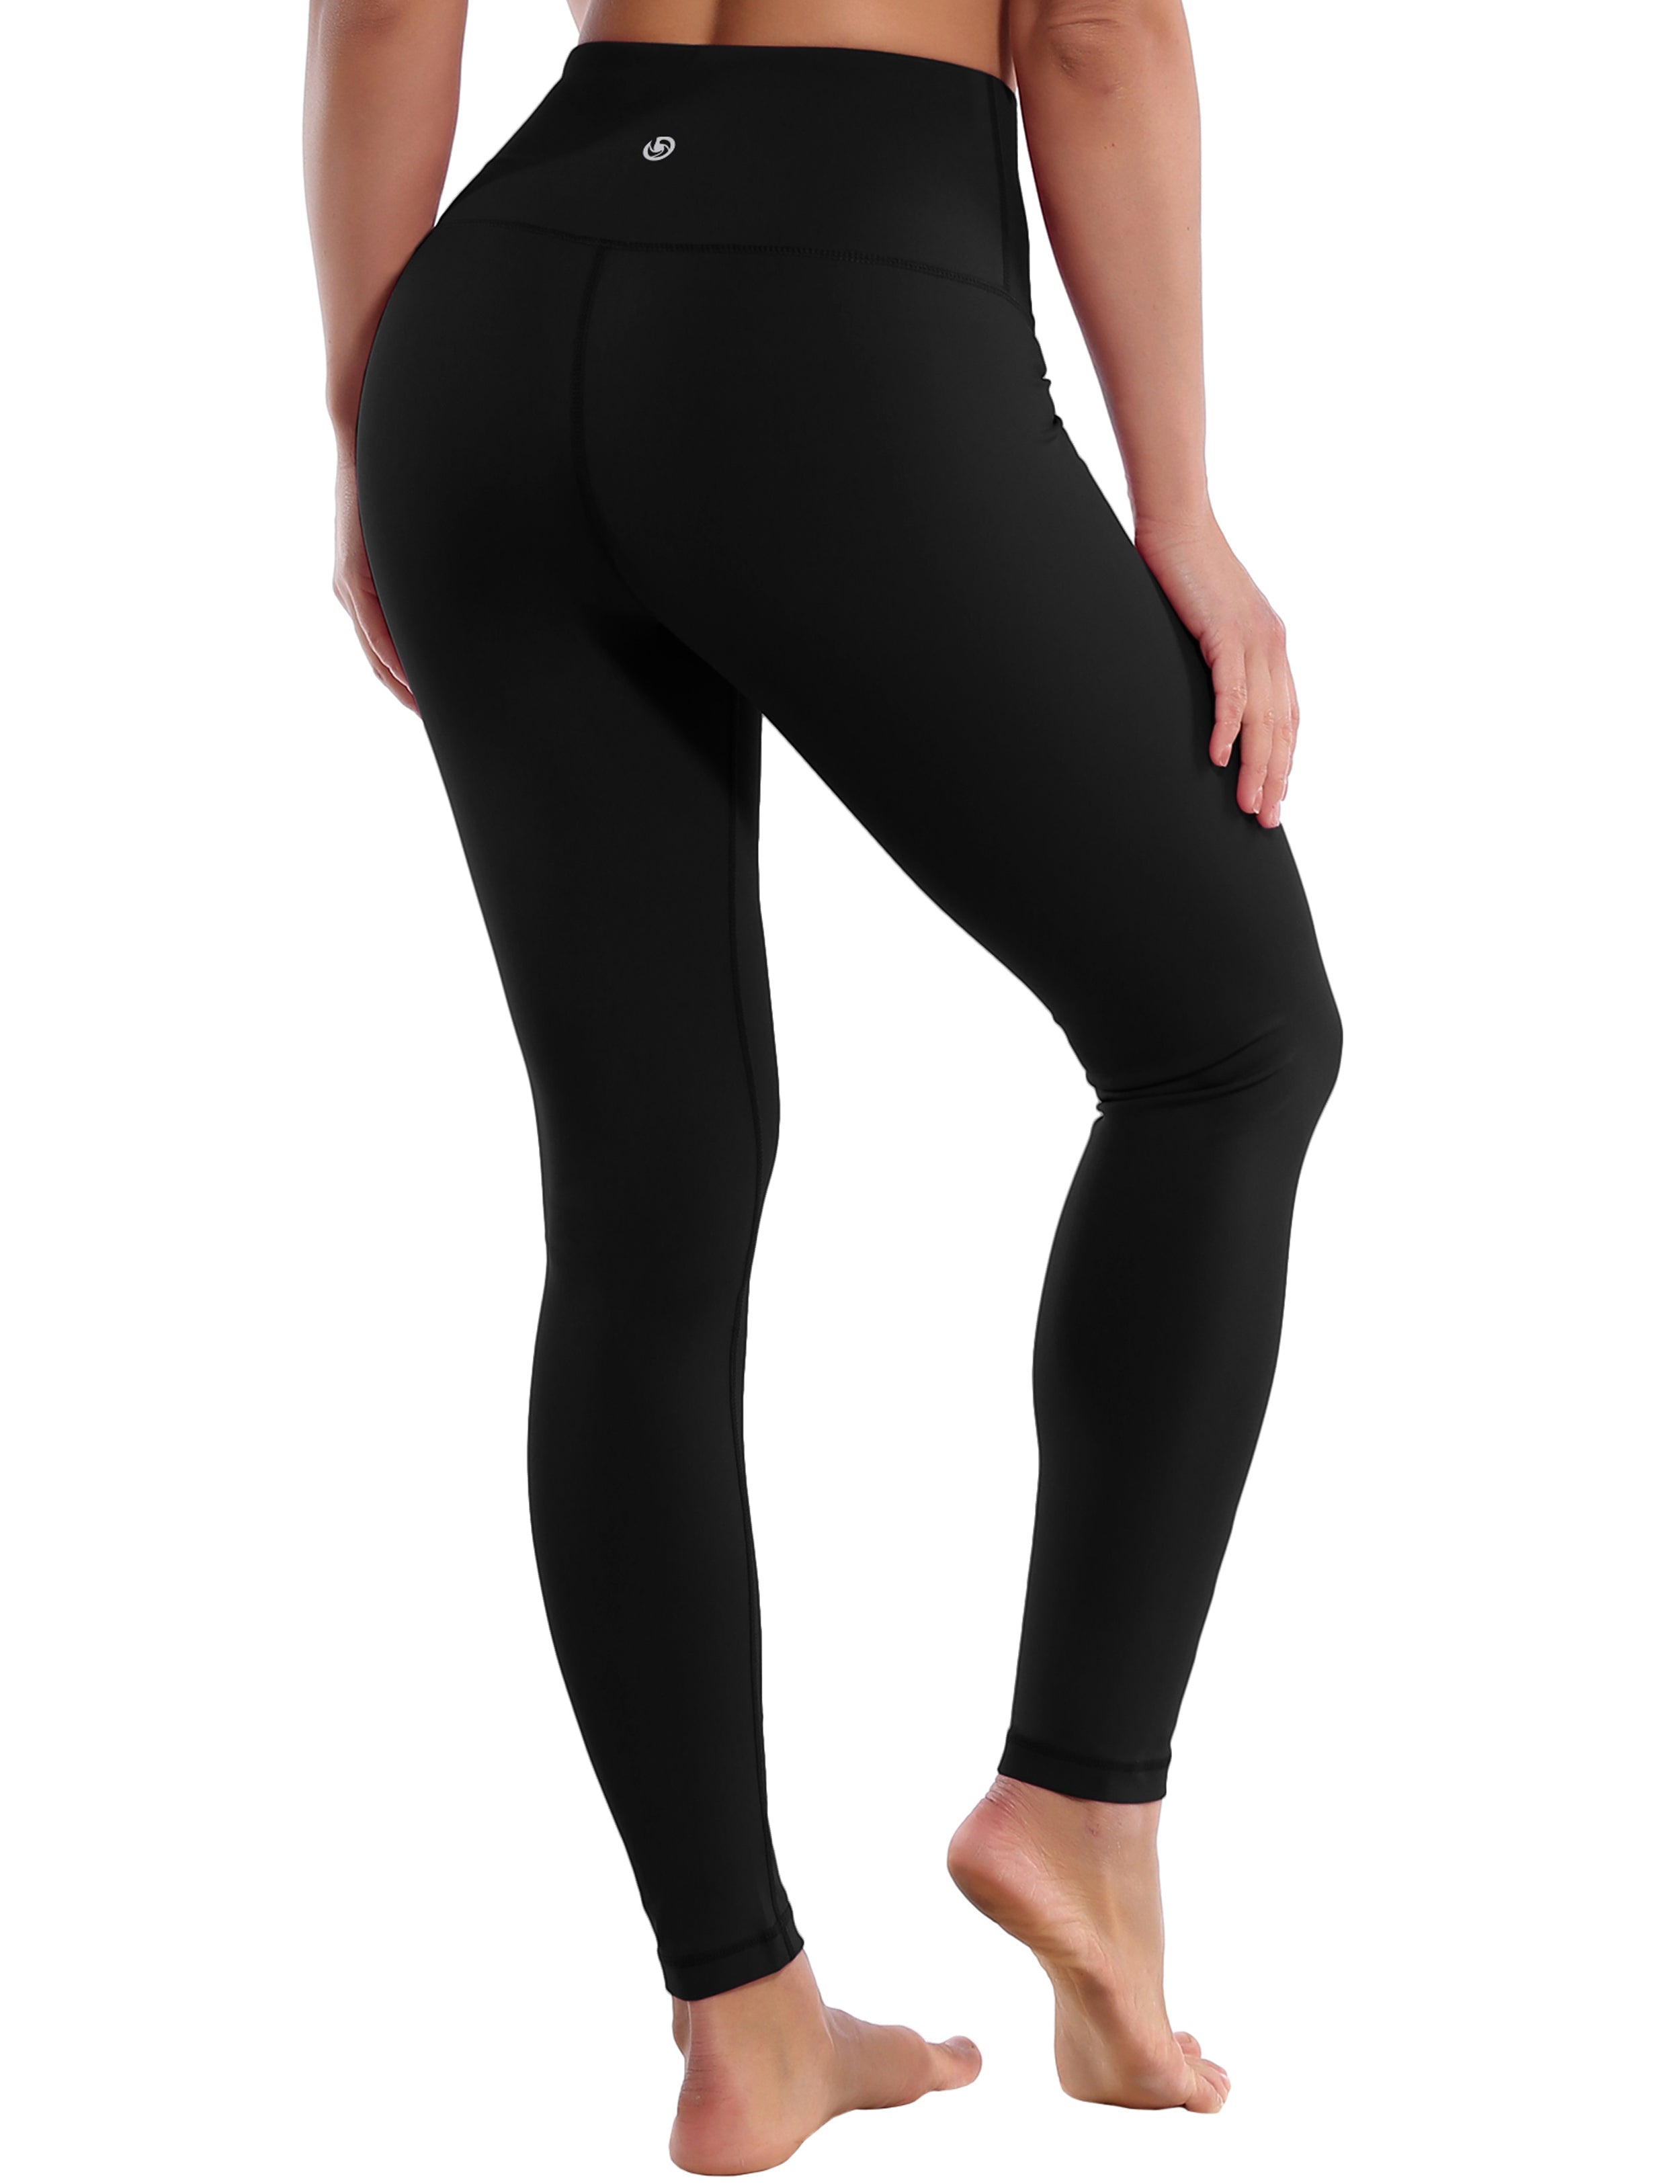 High Waist Jogging Pants black 75%Nylon/25%Spandex Fabric doesn't attract lint easily 4-way stretch No see-through Moisture-wicking Tummy control Inner pocket Four lengths